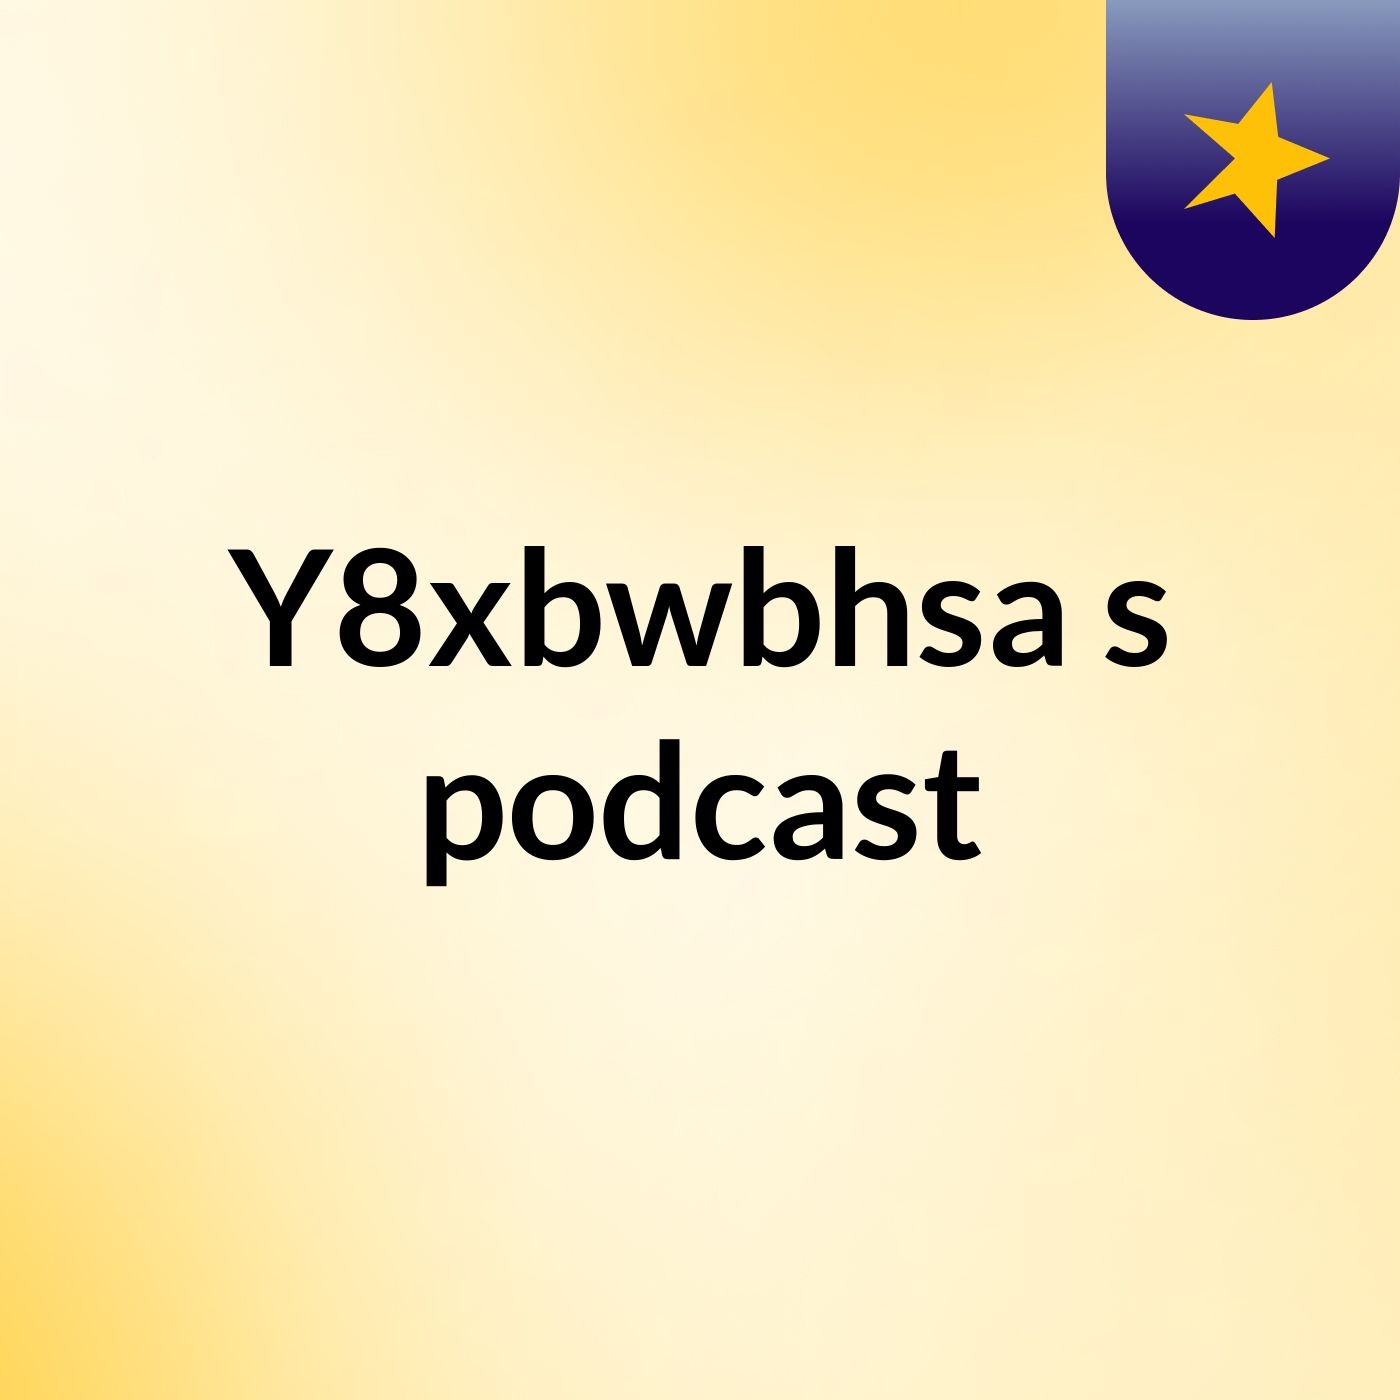 Y8xbwbhsa's podcast